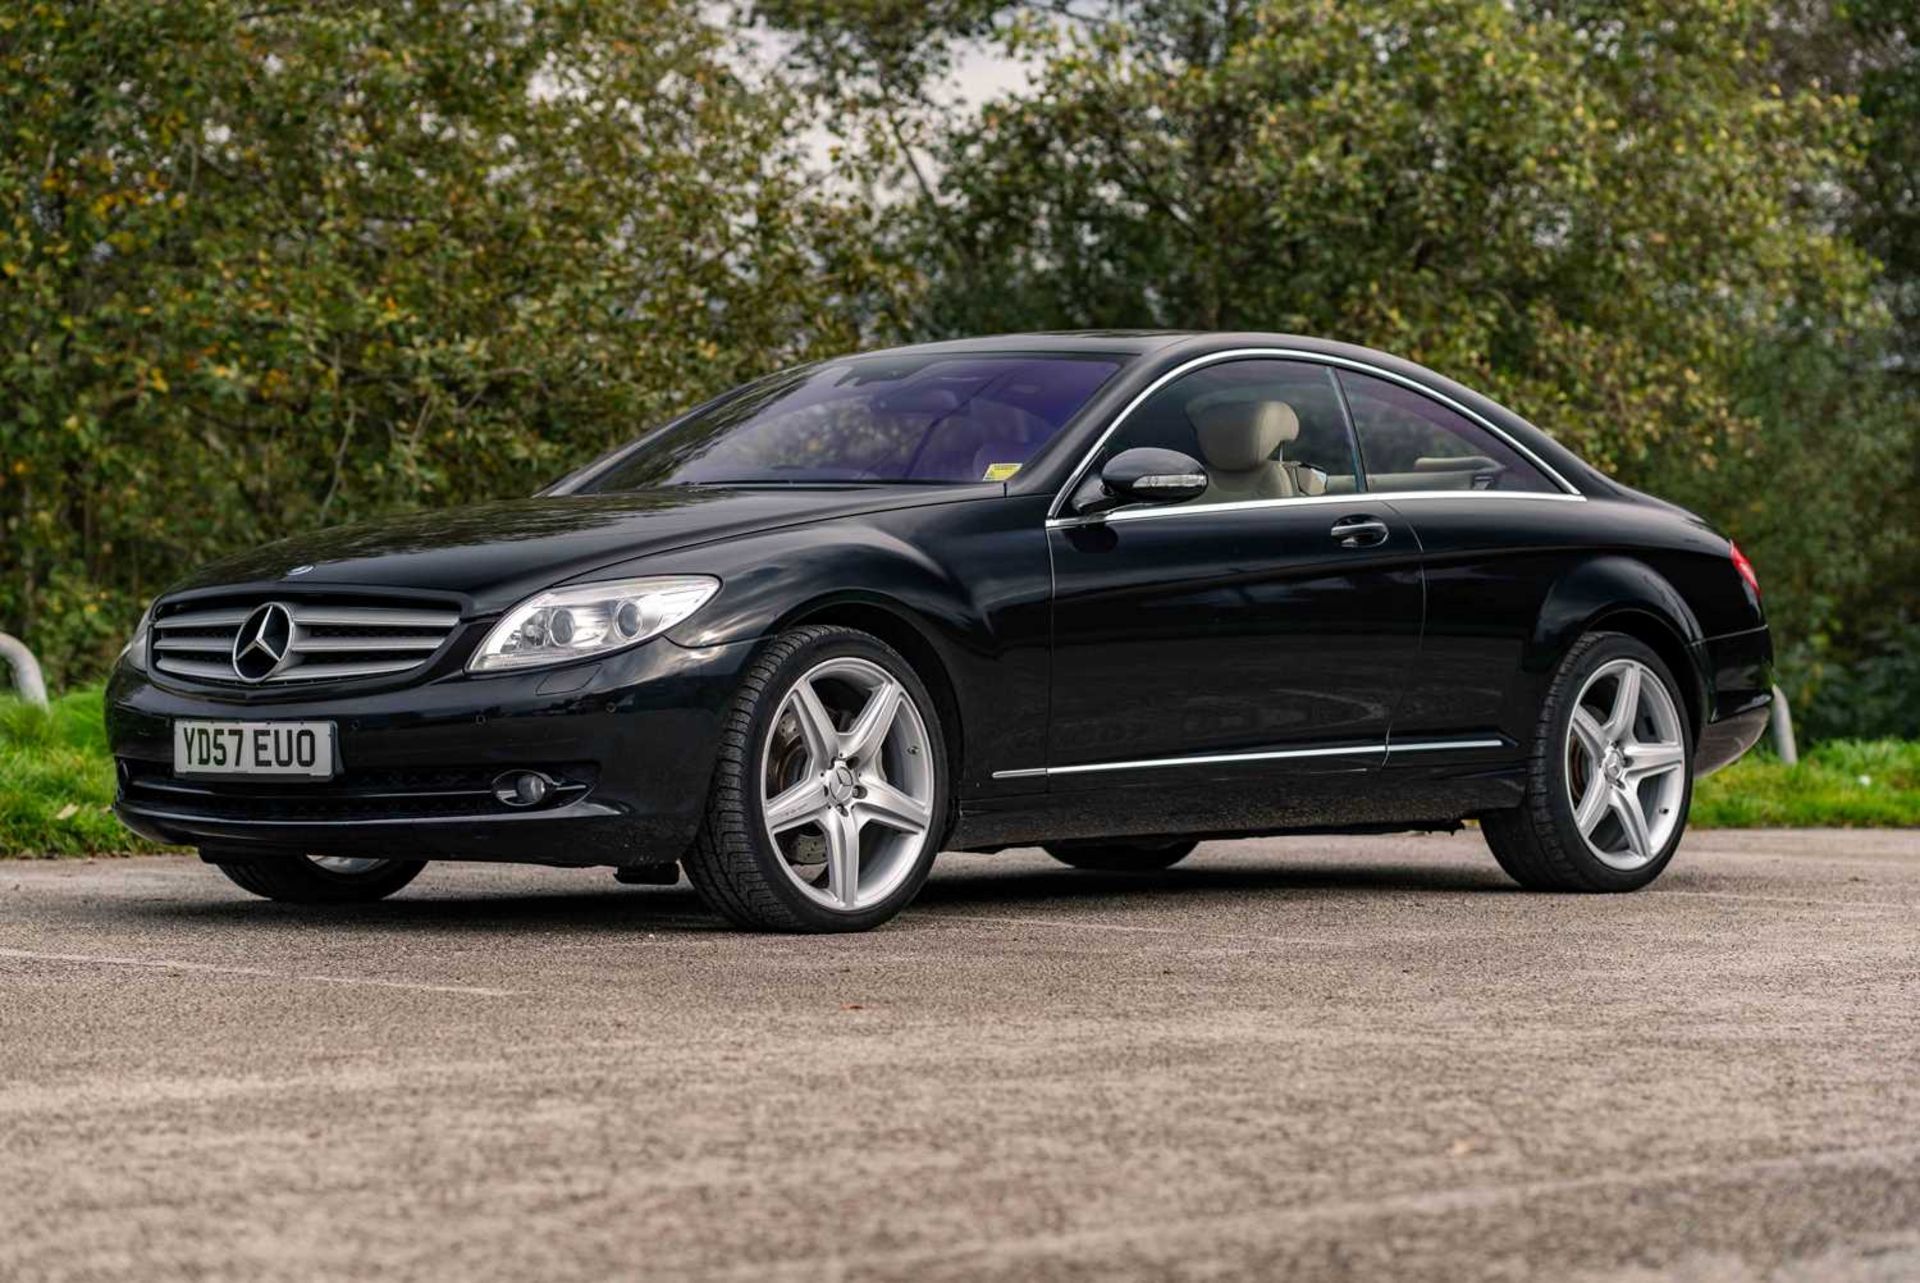 2008 Mercedes CL500 Four-keeper example of Mercedes’ flagship 2+2 coupe, with full service history a - Image 5 of 61